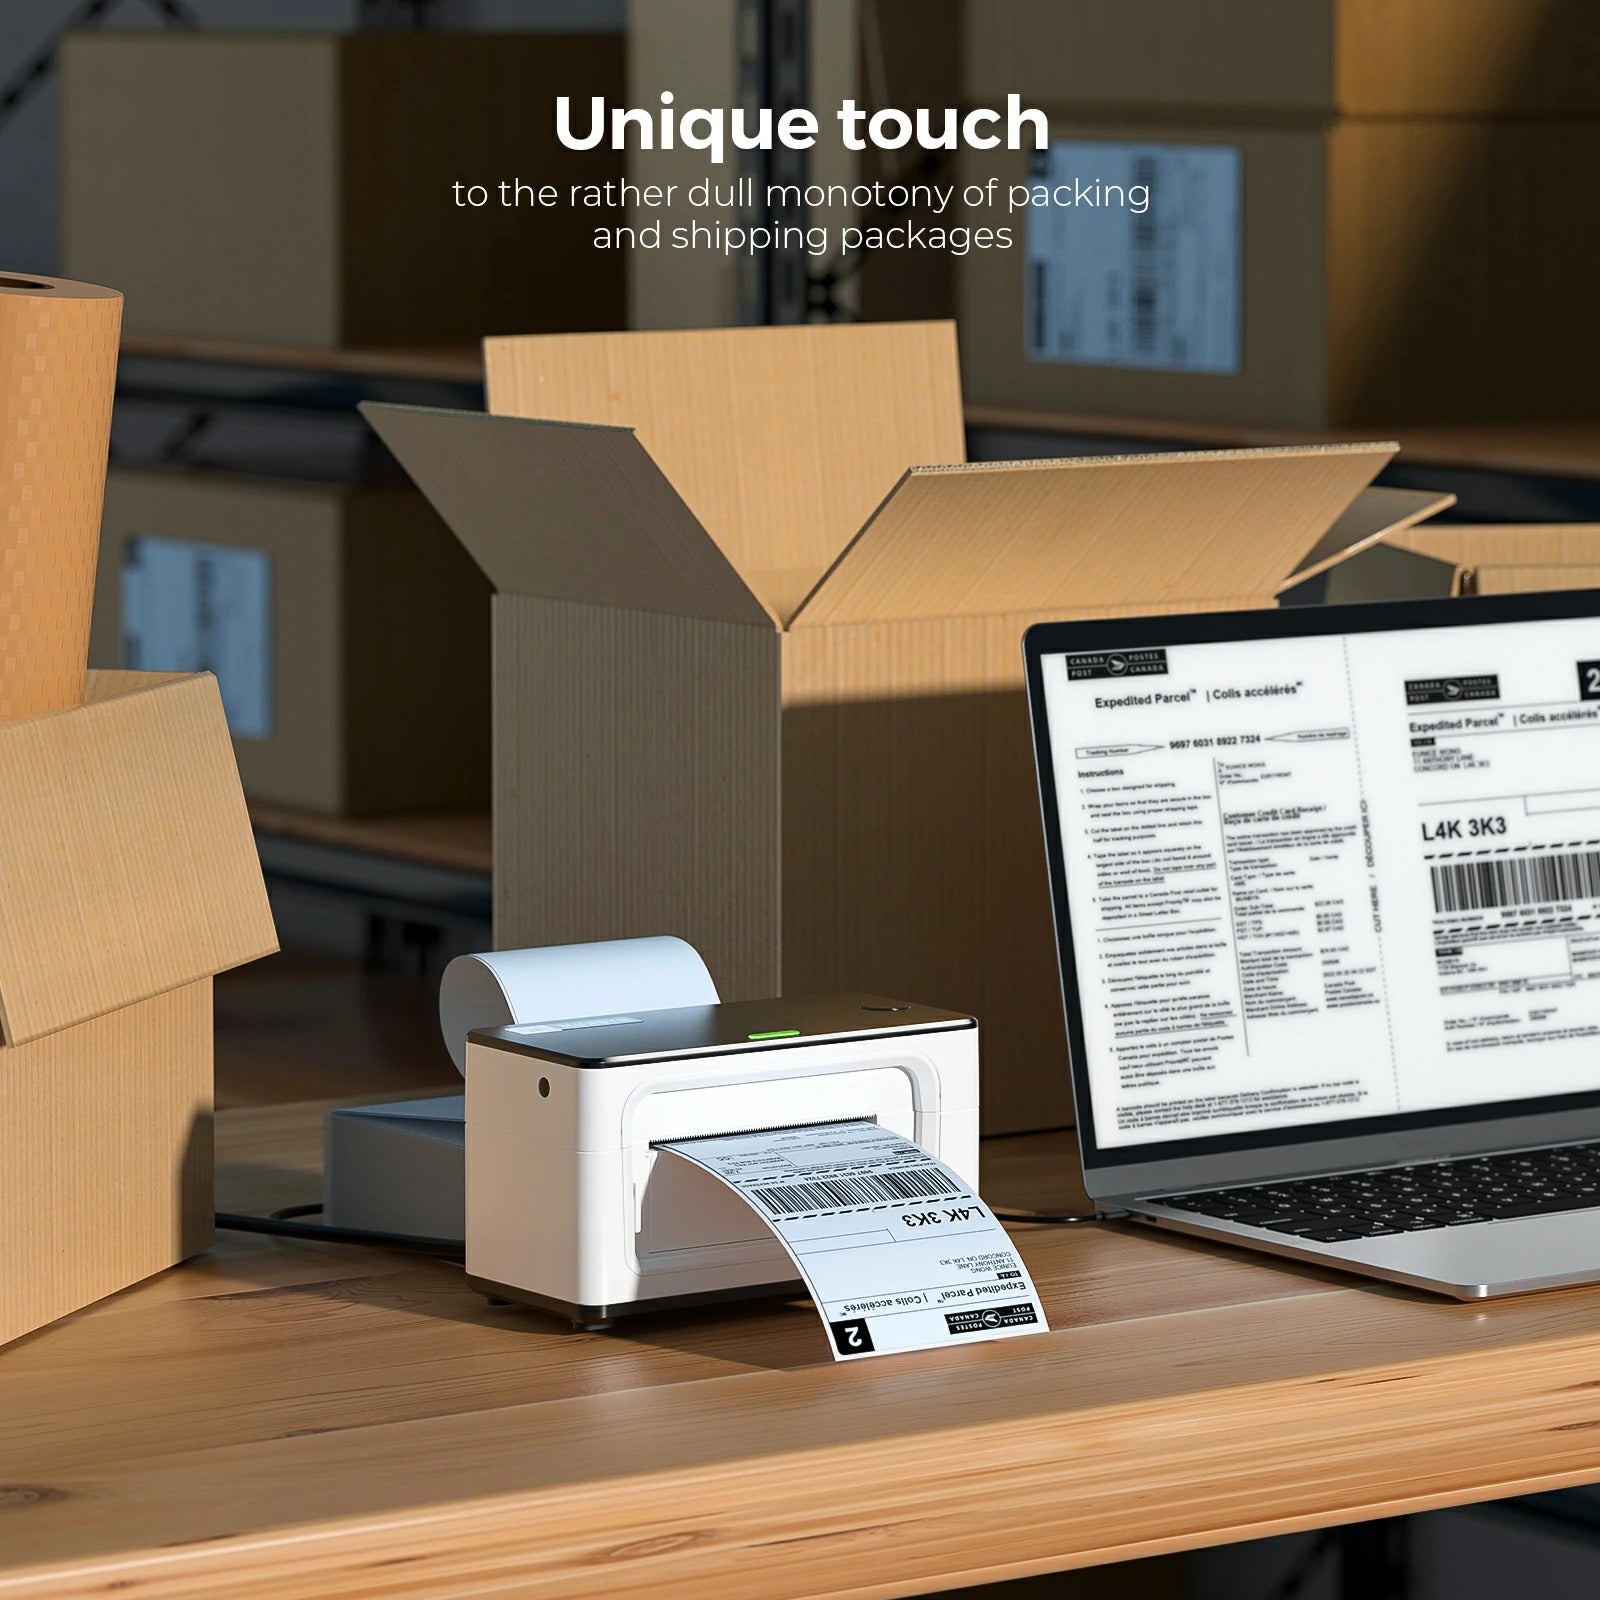 Available in multiple shades, MUNBYN shipping labels enable quick recognition and facilitate easier categorization of packages.